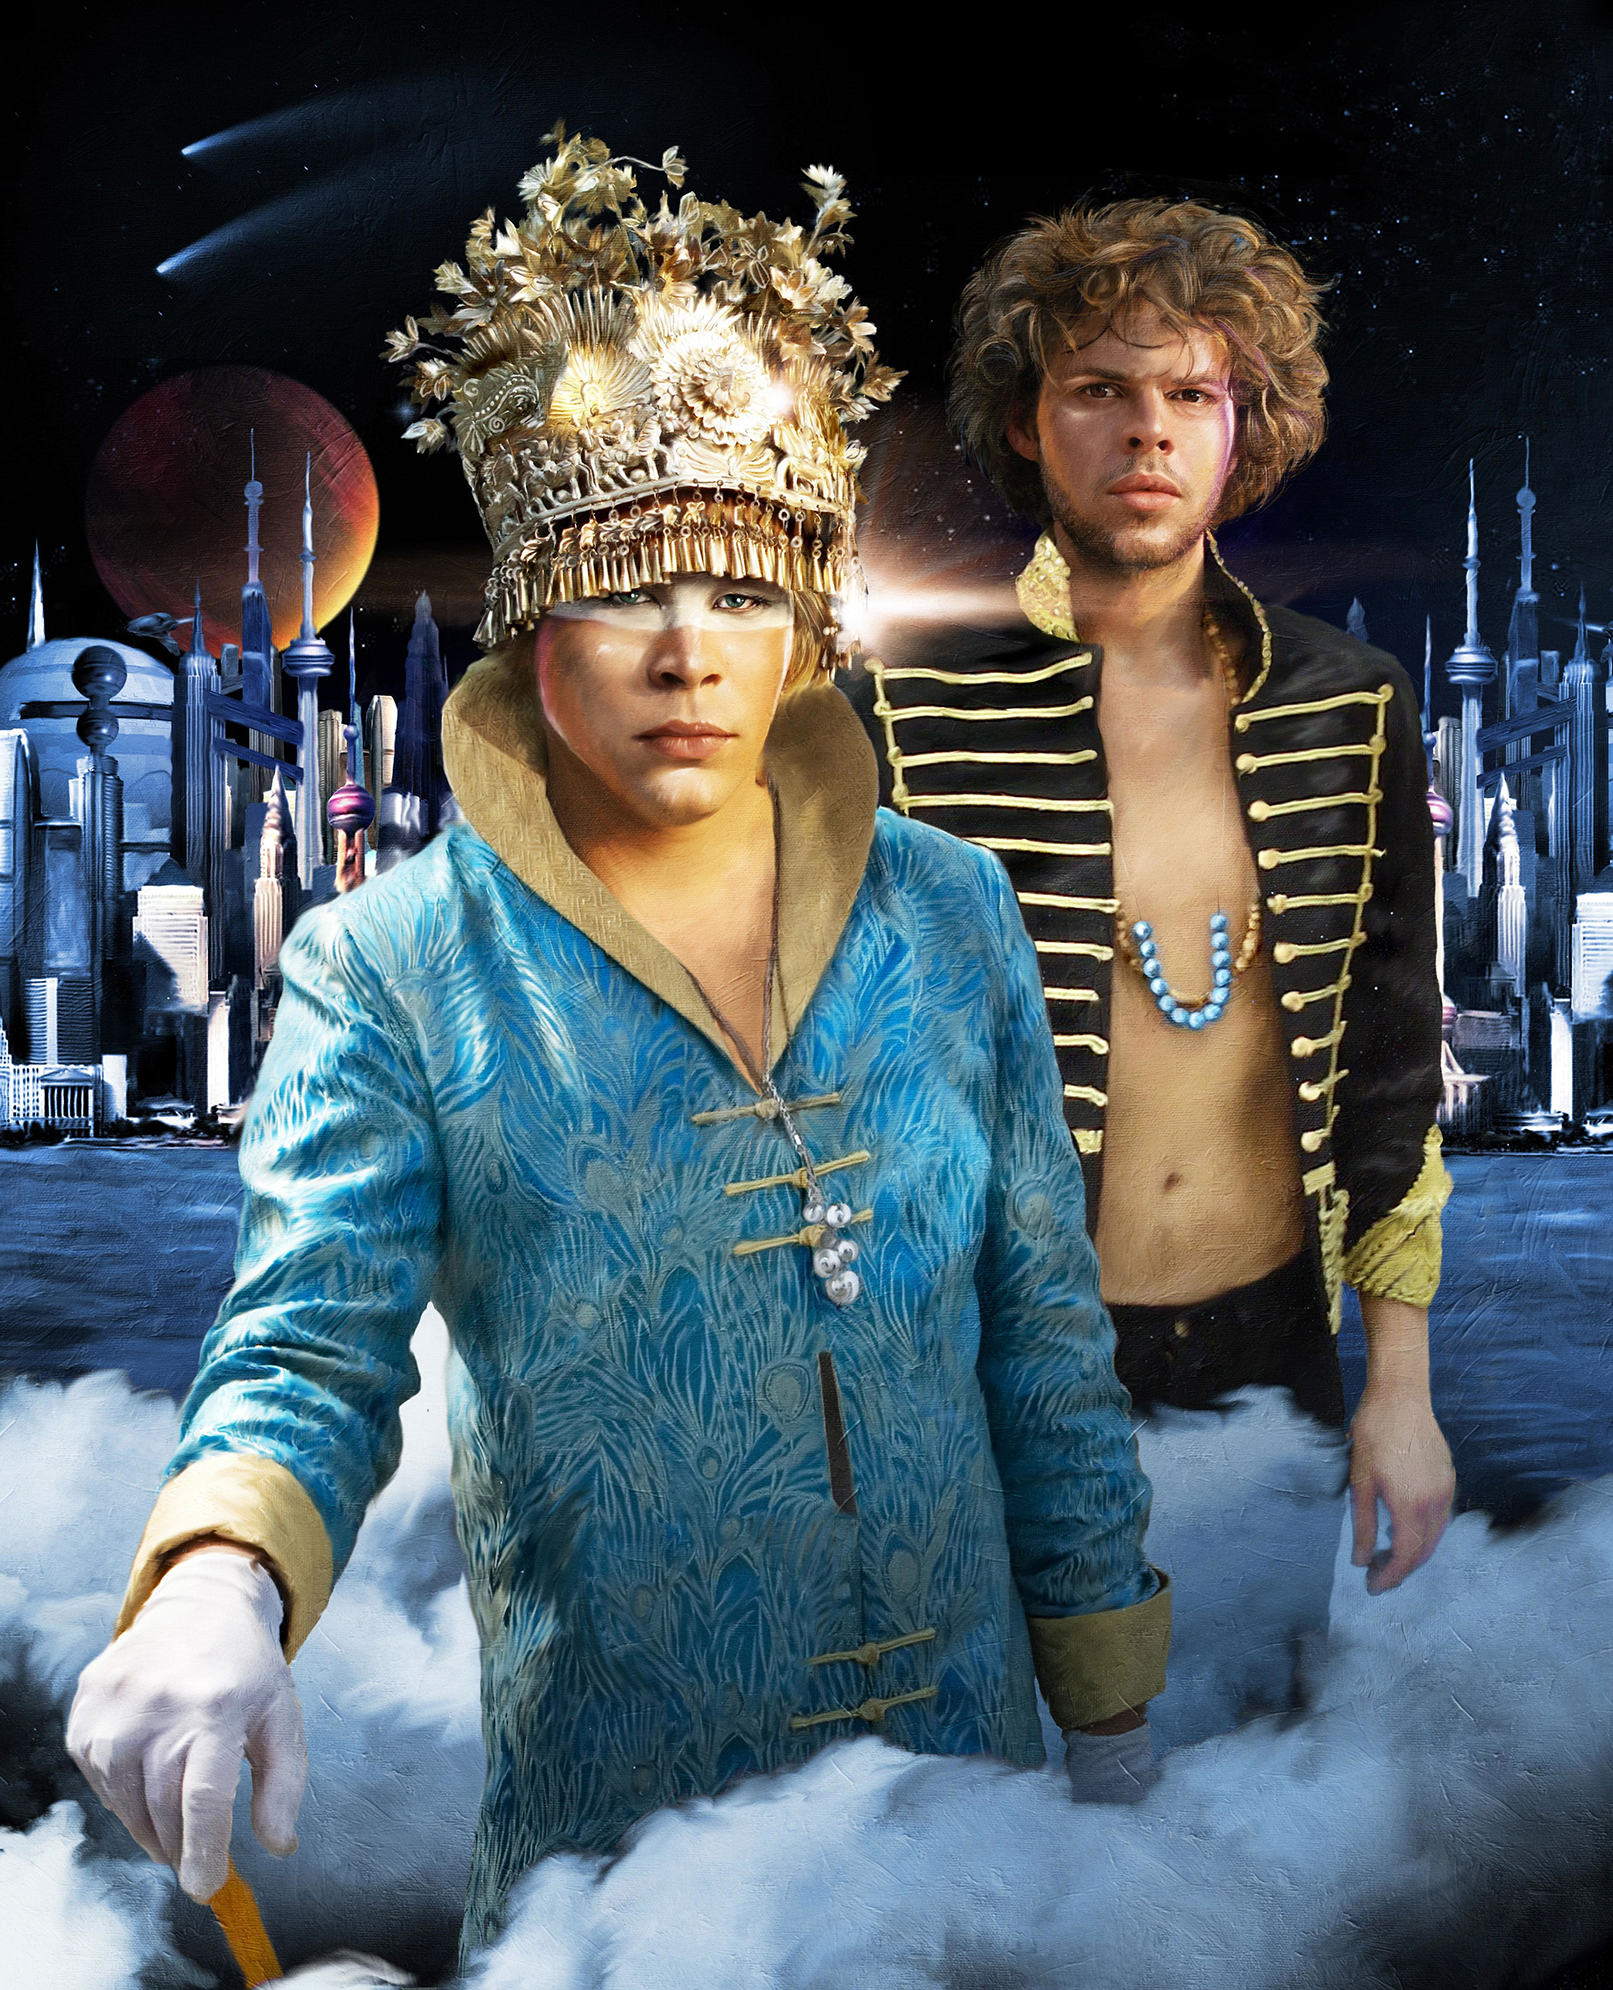 Empire Of The Sun Backgrounds, Compatible - PC, Mobile, Gadgets| 1613x1990 px